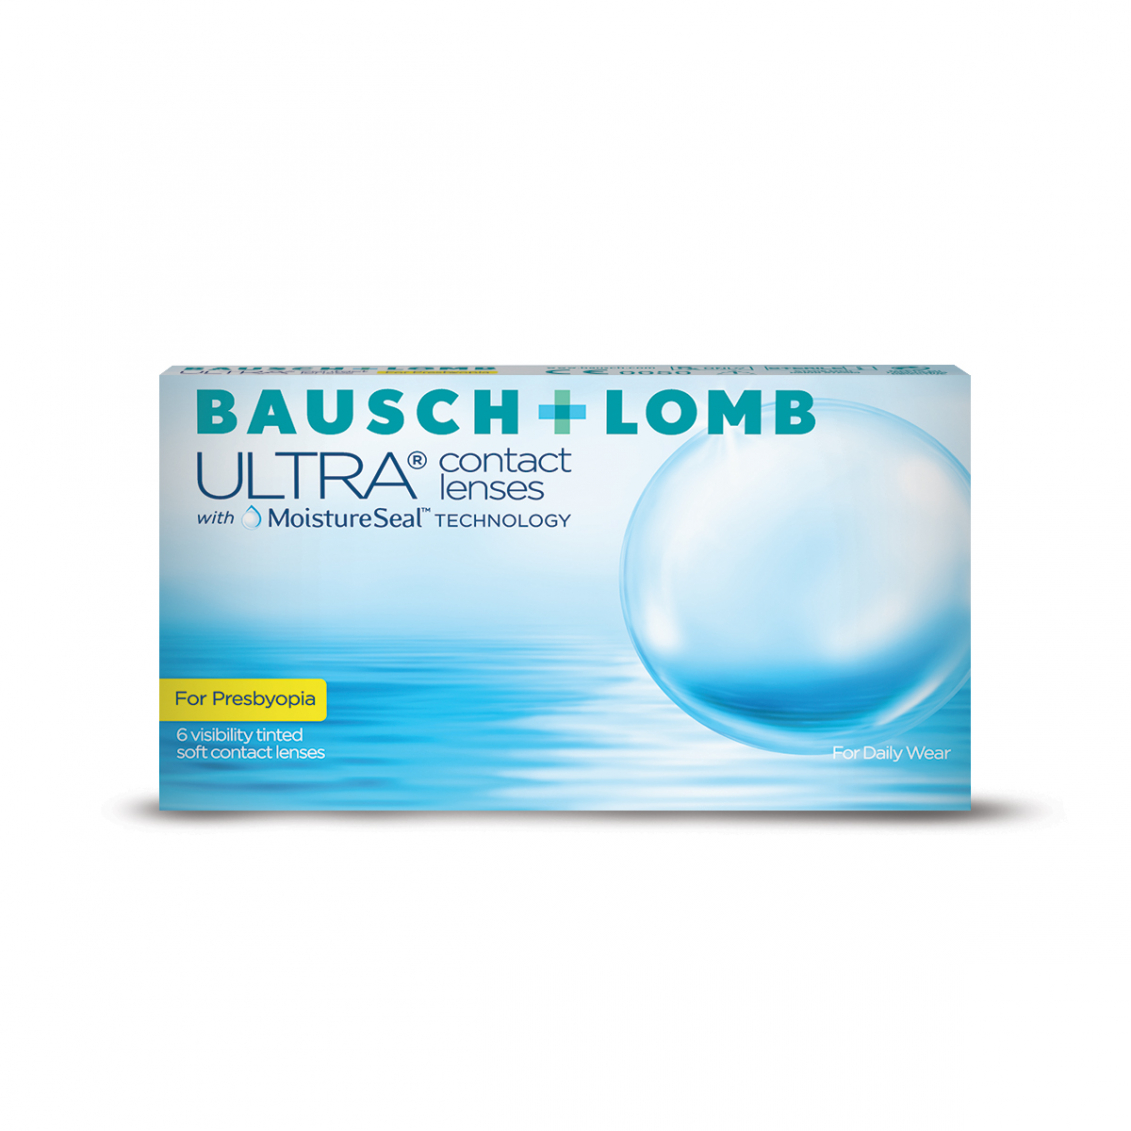 BAUSCH + LOMB ULTRA FOR PRESBYOPIA